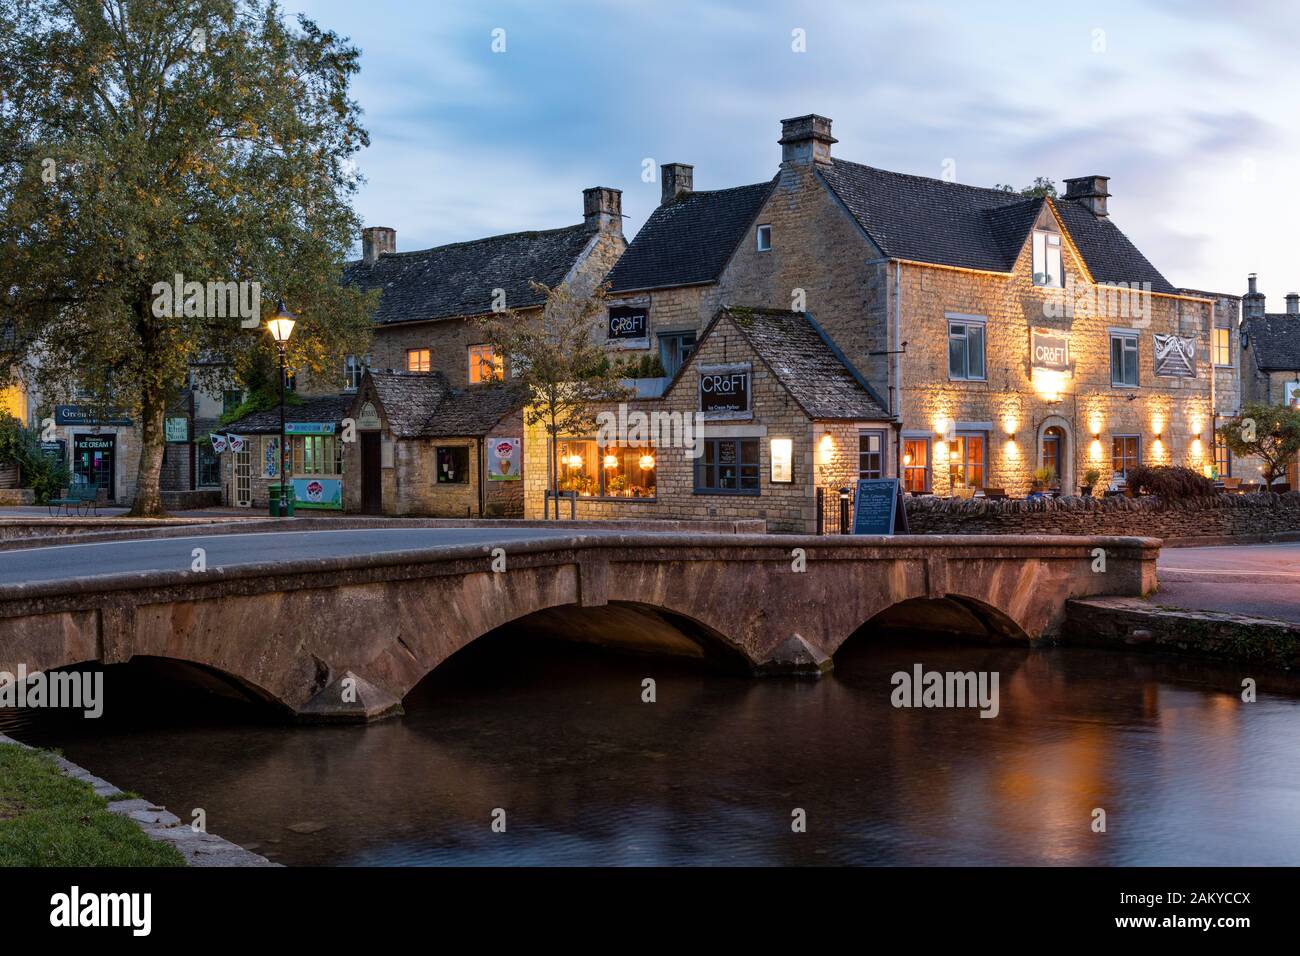 Evening view of Bourton on the Water along River Windrush in the Cotswolds, Gloucestershire, England, UK Stock Photo